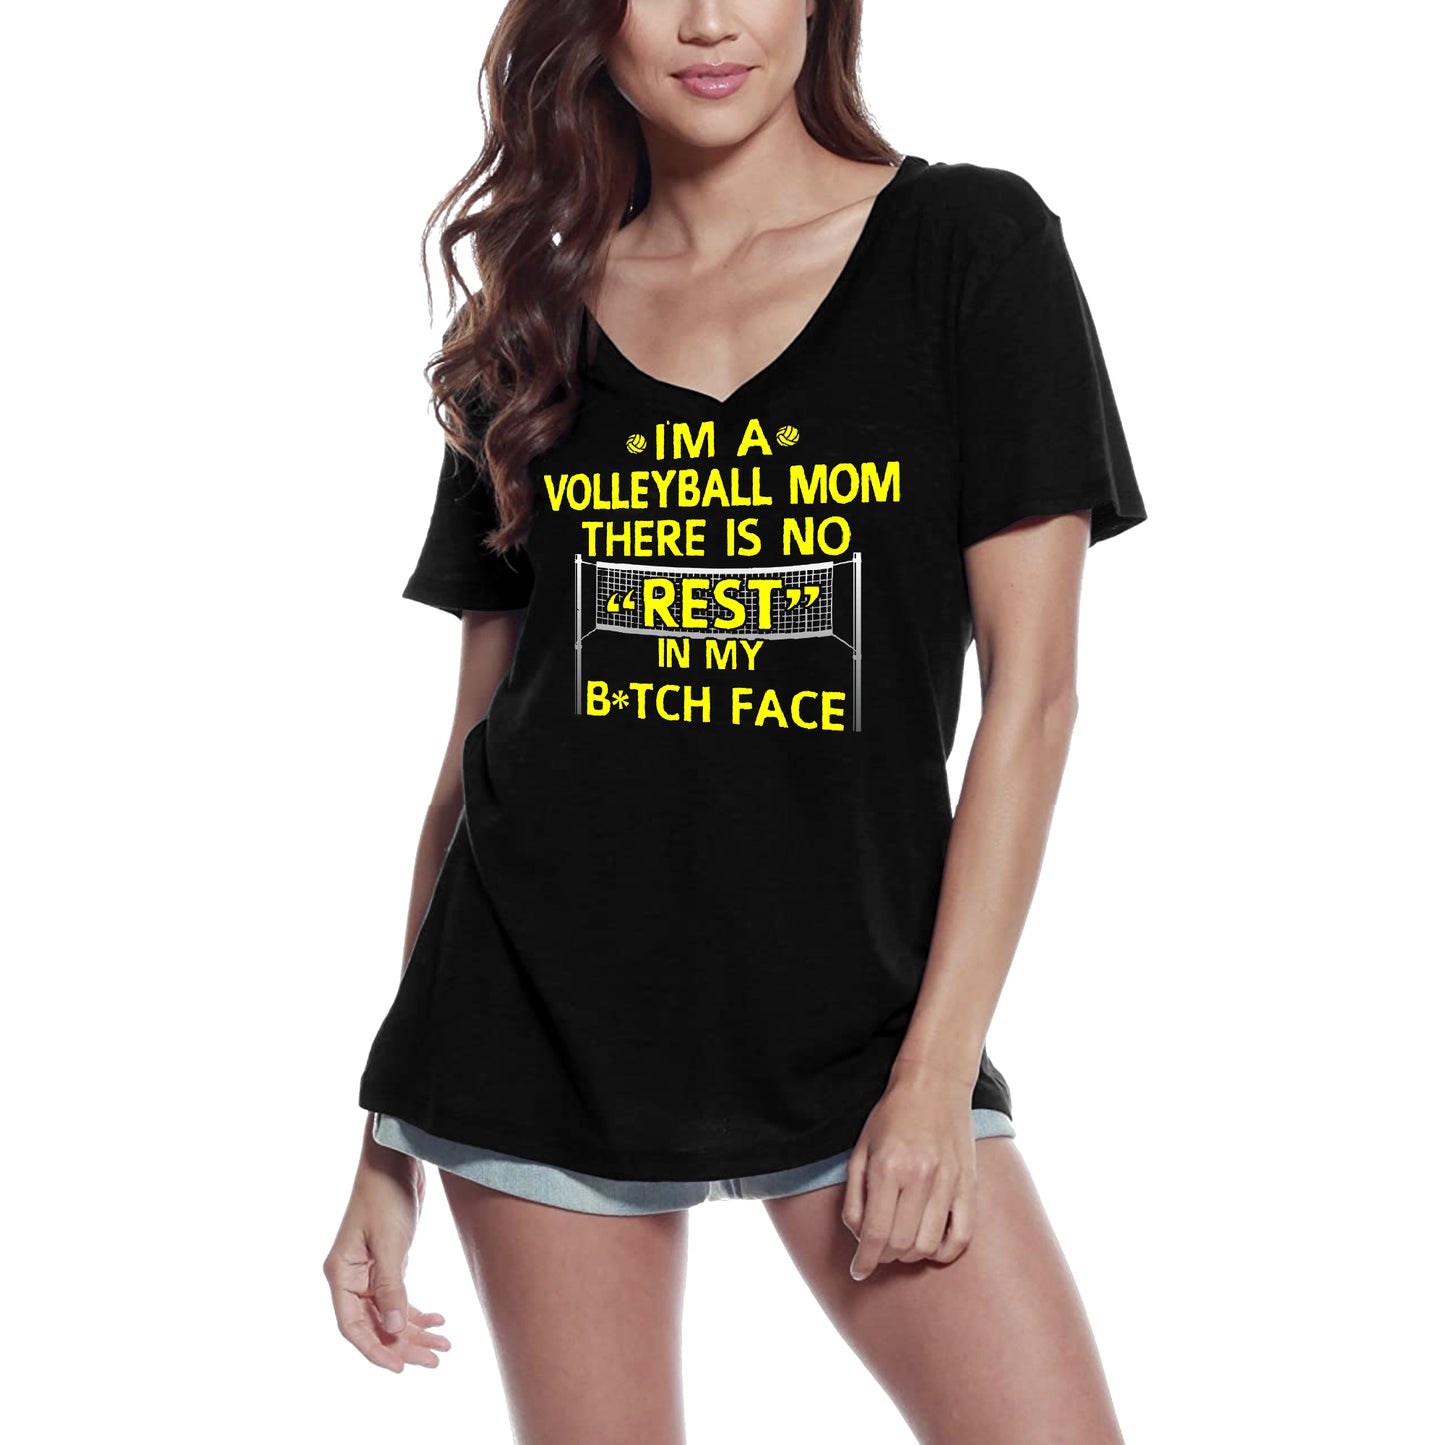 ULTRABASIC Women's V-Neck T-Shirt I'm a Volleyball Mom - Funny Quote